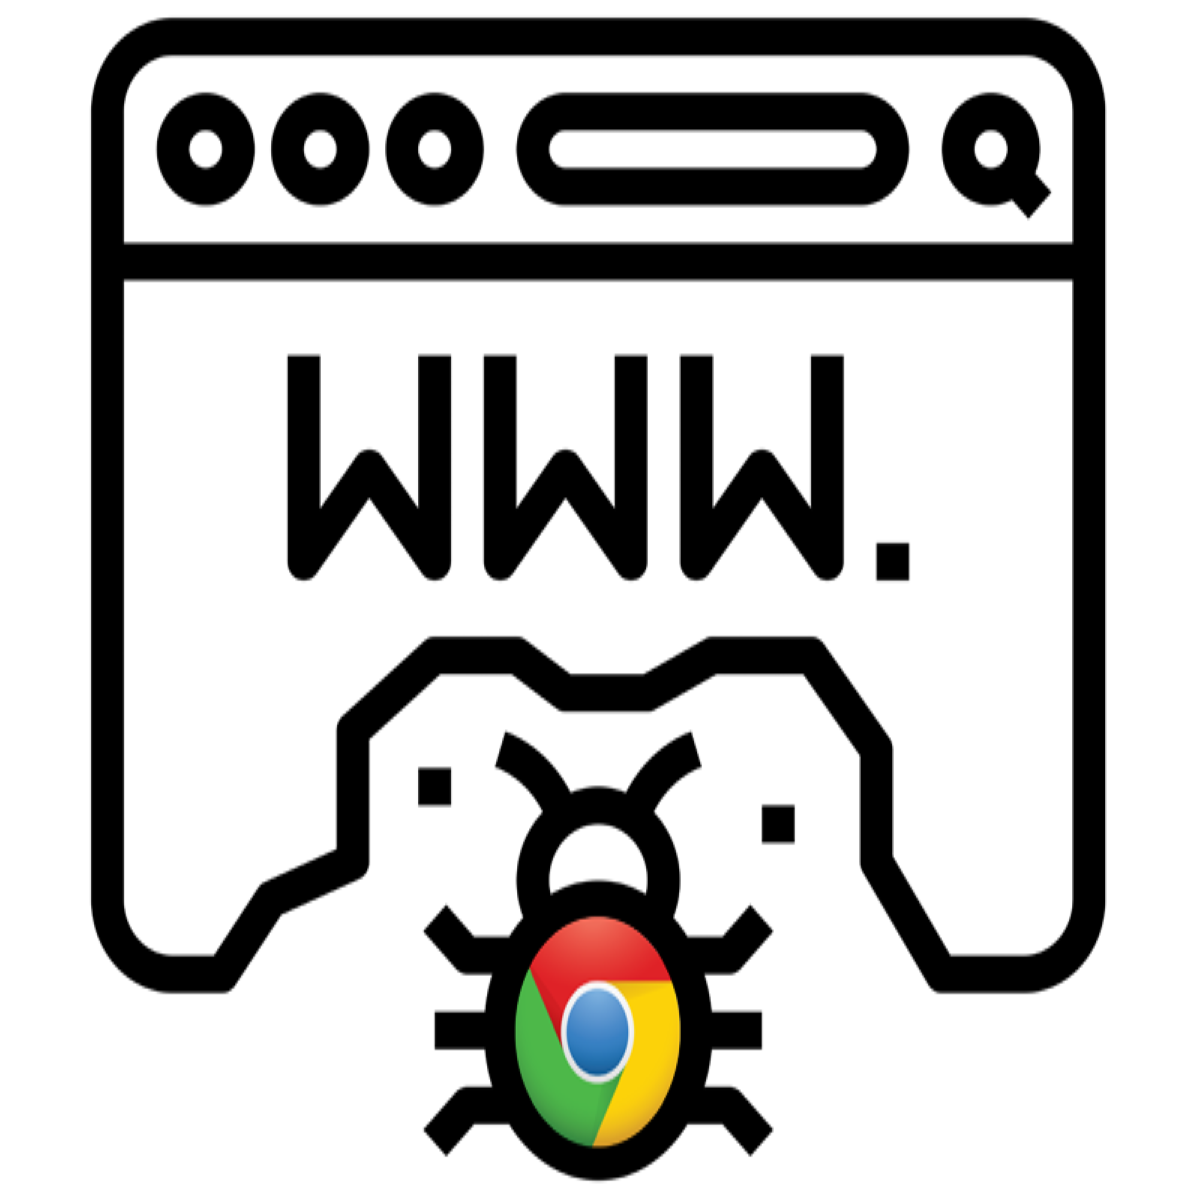 Google Chrome Zero-Day Bugs Exploited Weeks Ahead of Patch